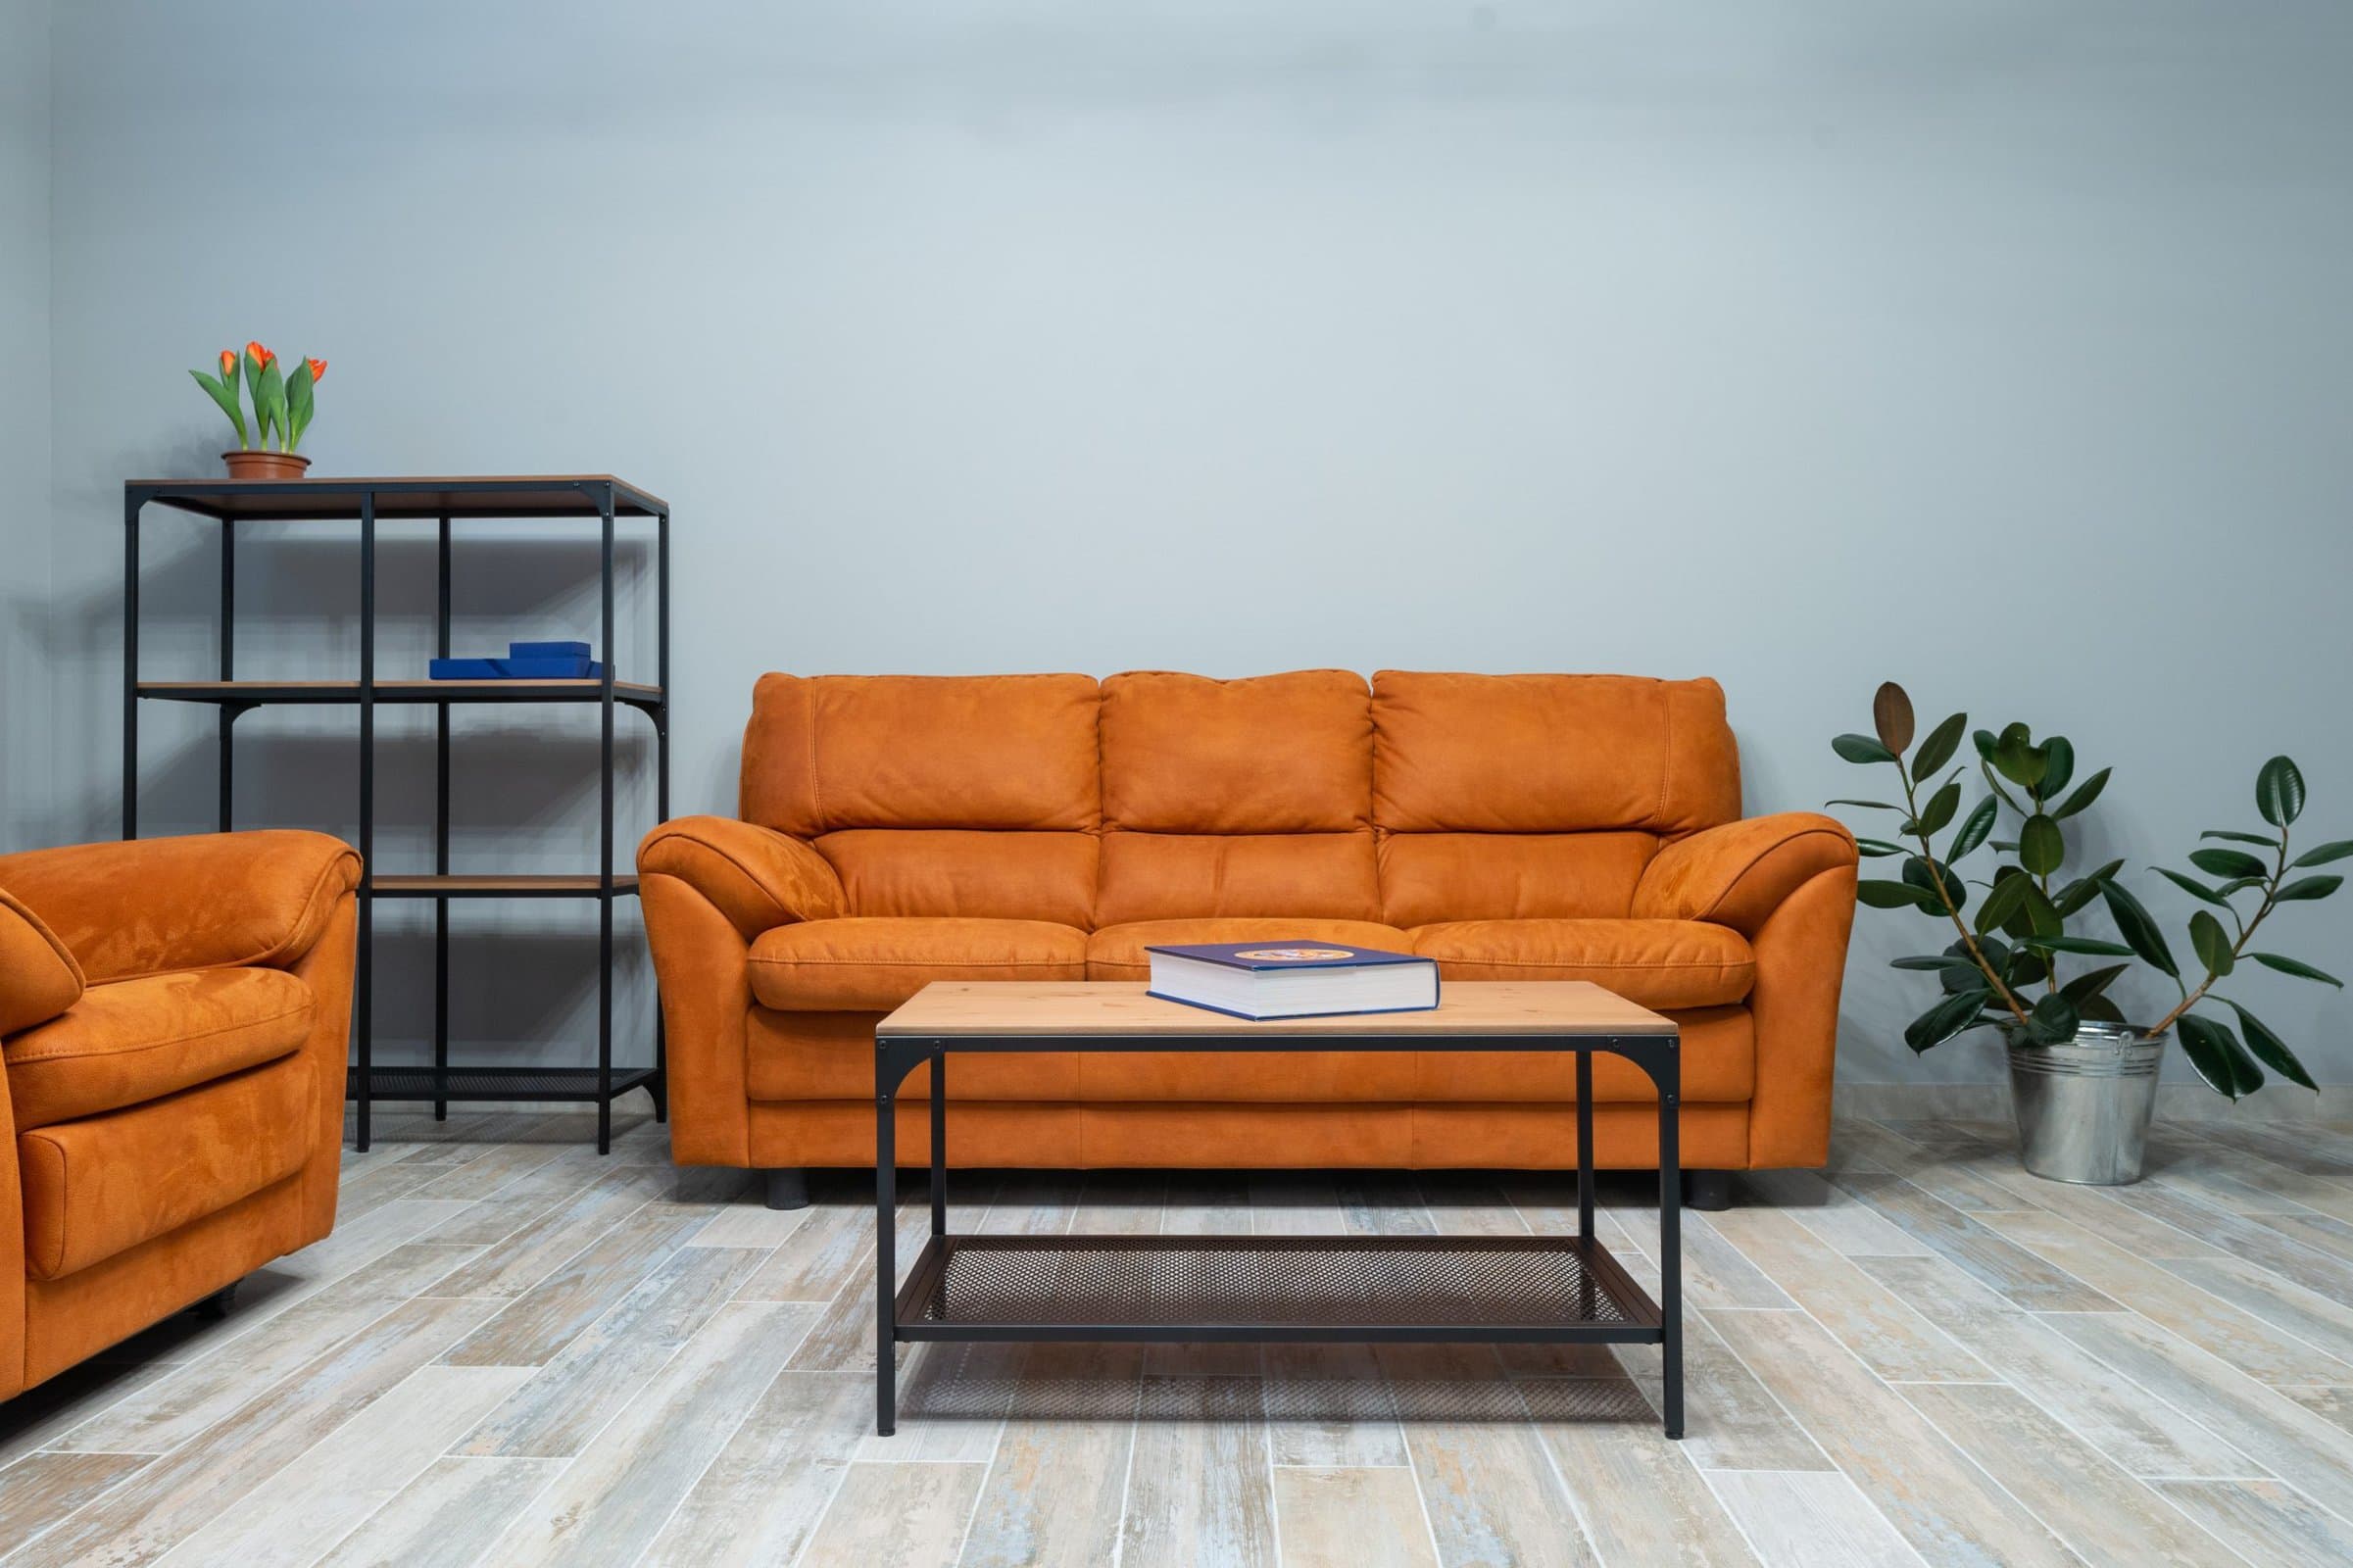  Go Bold with an Orange Sofa and Gray Floors scaled